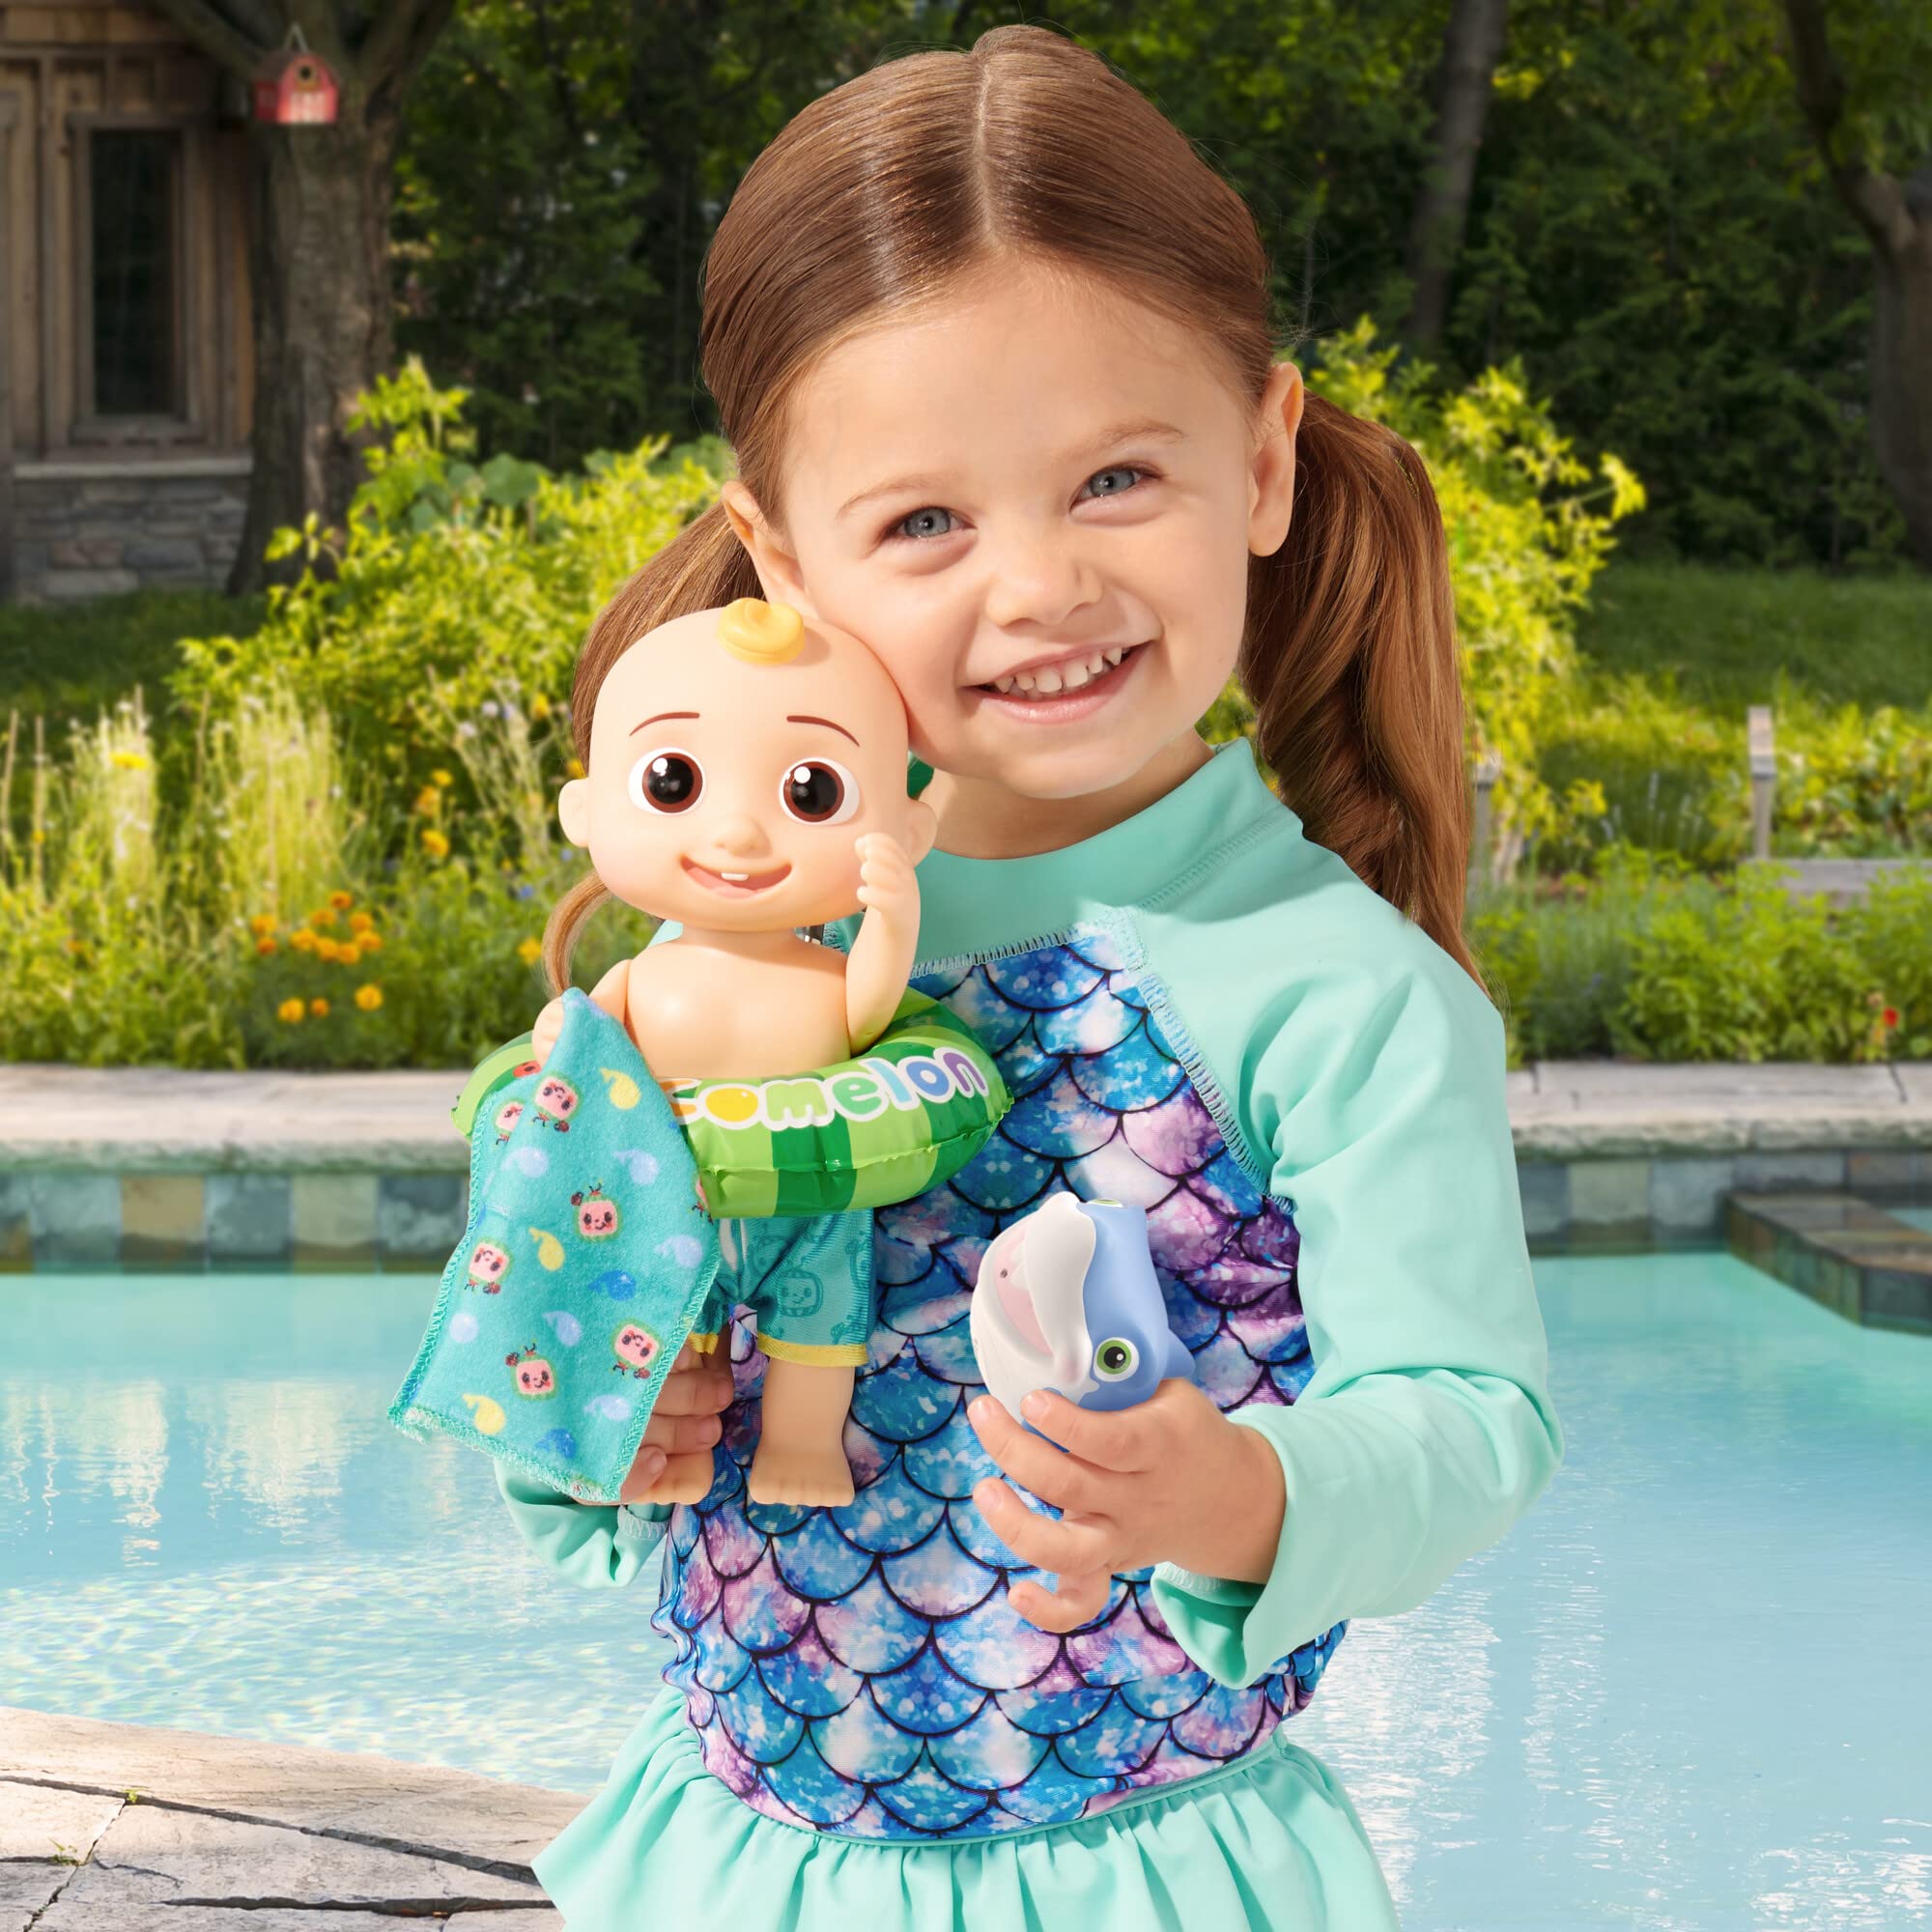 CoComelon - Splish Splash JJ Doll- with Shark Bath Squirter and Water Accessories - CoComelon Water Play - Toys for Kids and Preschoolers - Amazon Exclusive